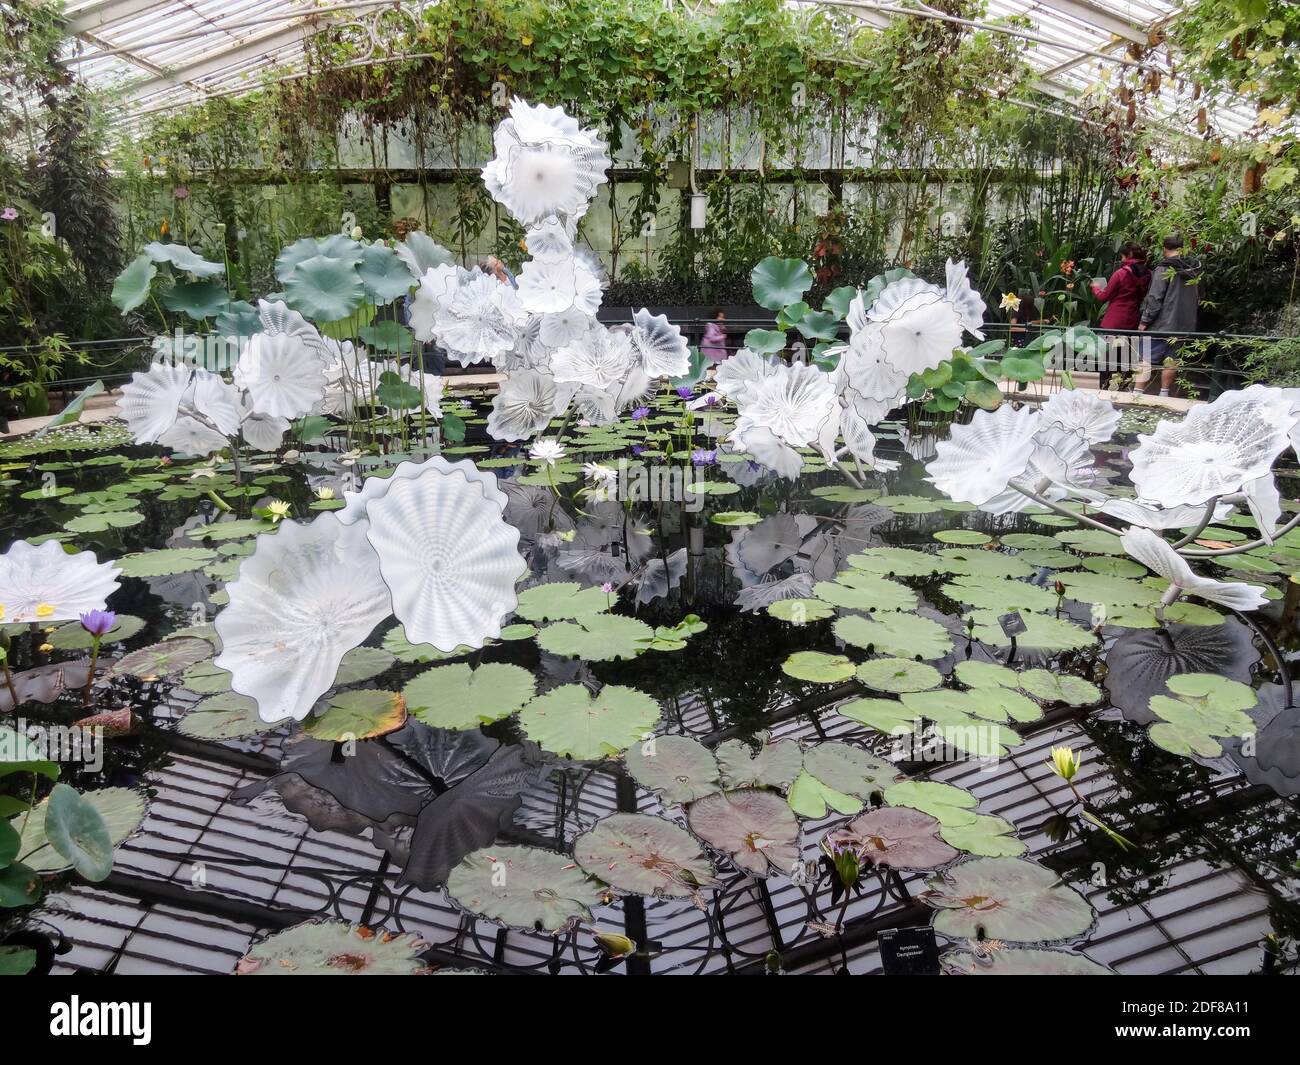 Dale Chihuly's Ethereal White Persian Waterlilies Pond sculpture in Kew Gardens, London, UK Stock Photo